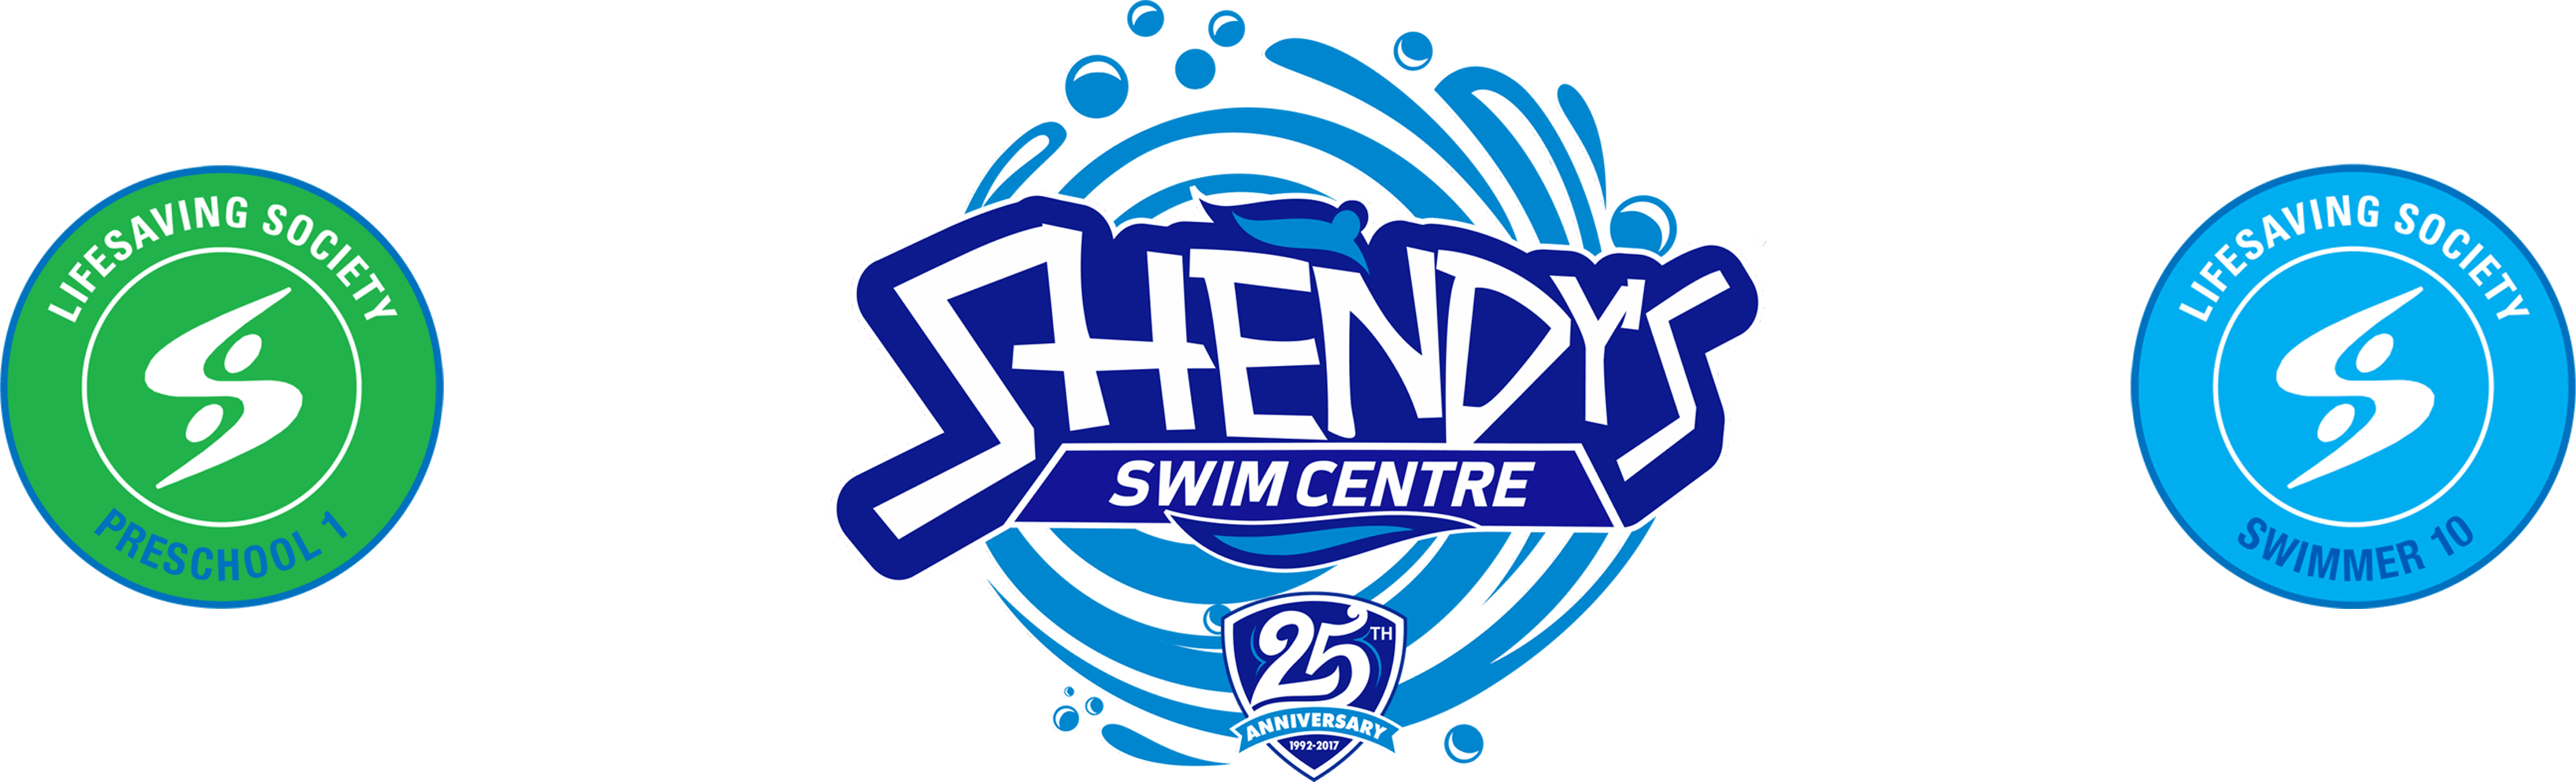 Shendy's Swim Centre partnering with Robin Hood to offer a special Lifesaving Society swim program to all campers this summer!